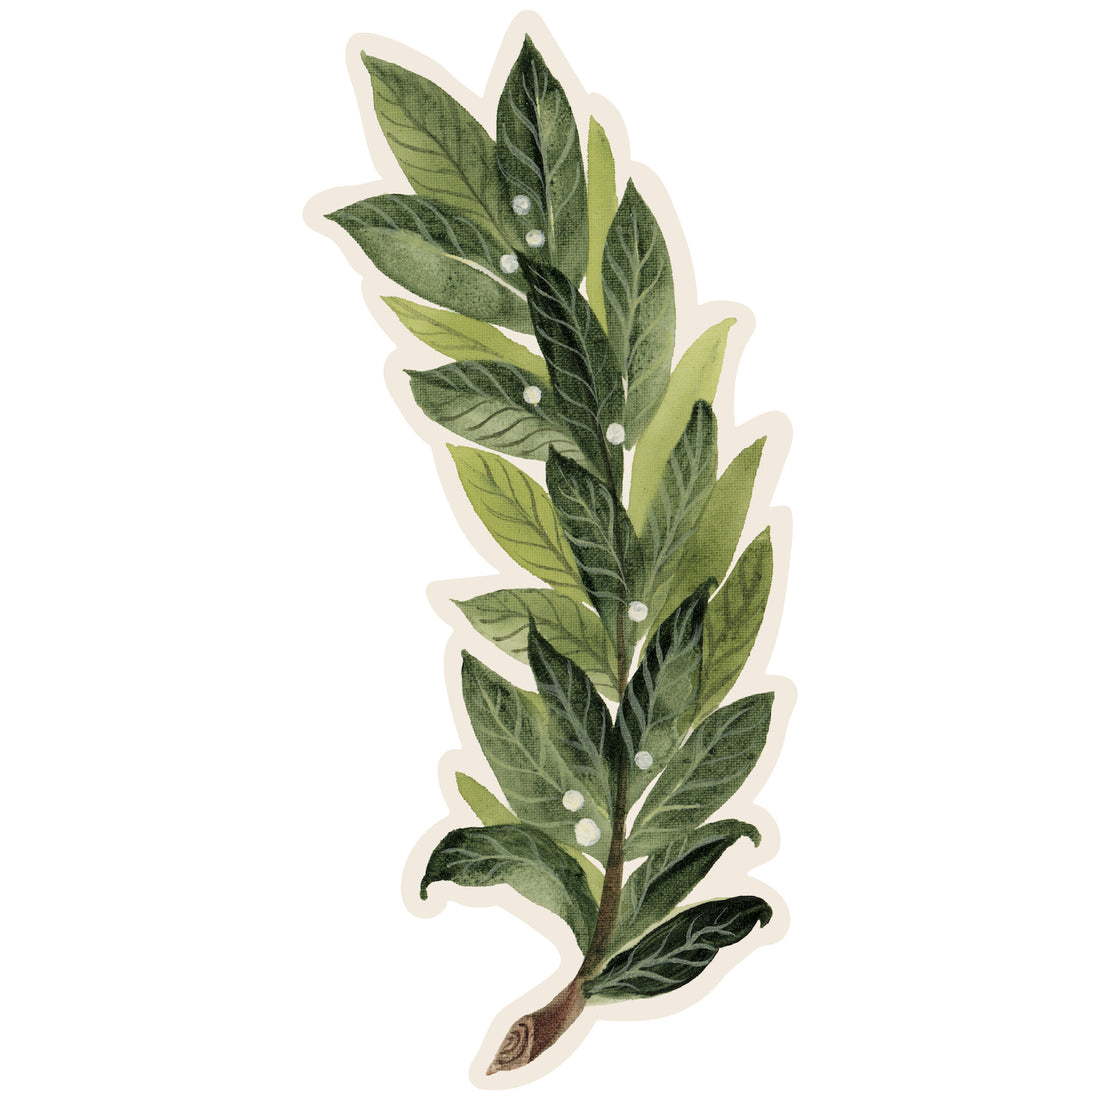 A die-cut watercolor illustration of a laurel sprig with small white berries. 